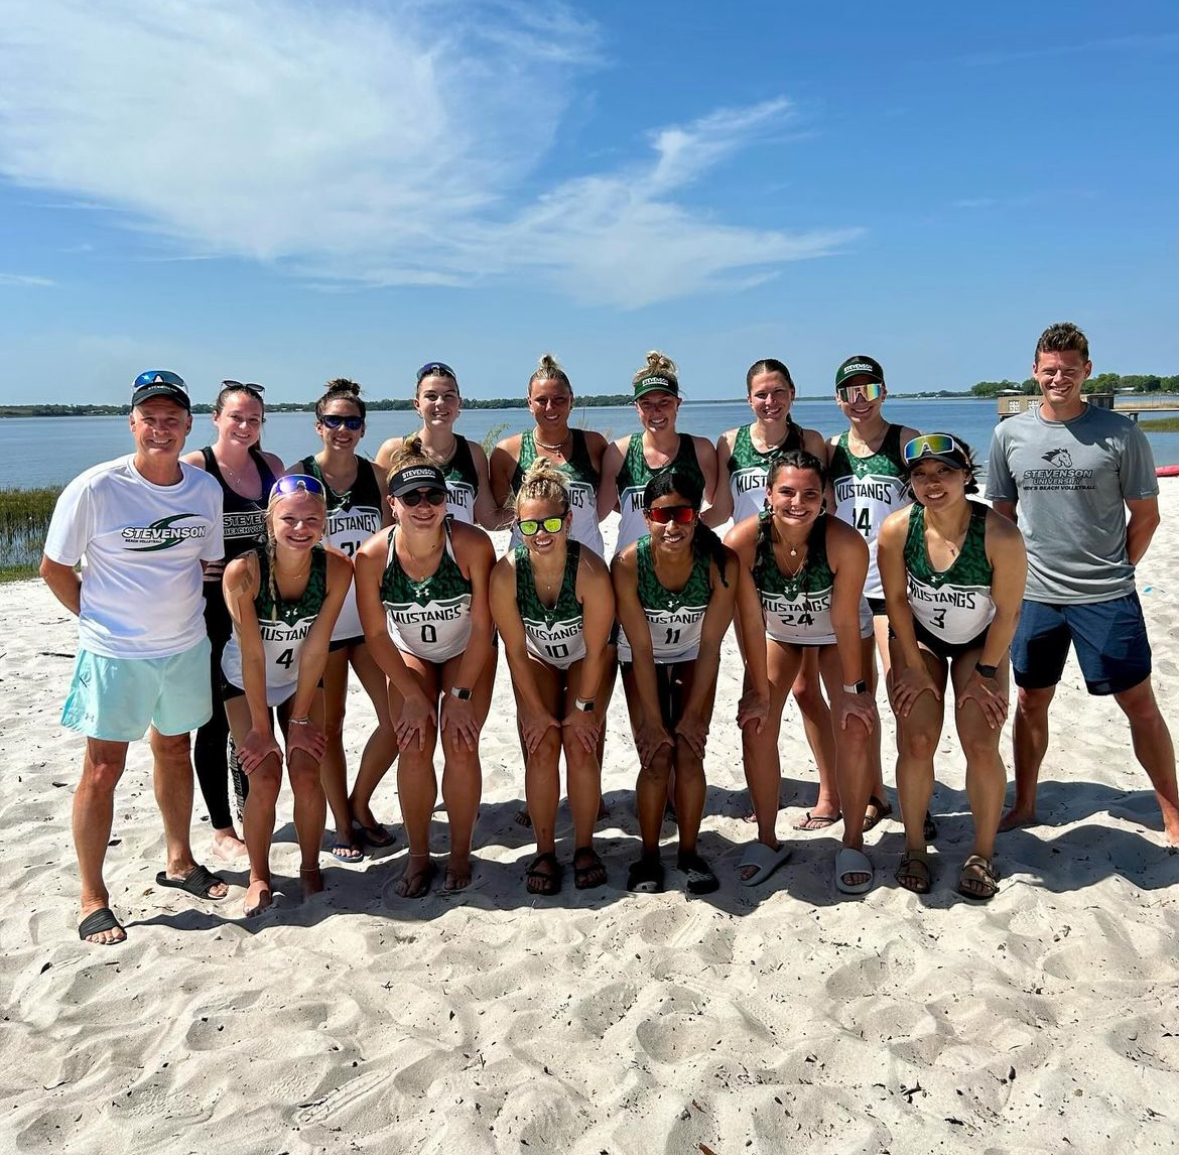 The Women's Beach Volleyball team in Florida last weekend. Photo courtesy of Stevenson_wvb on Instagram.